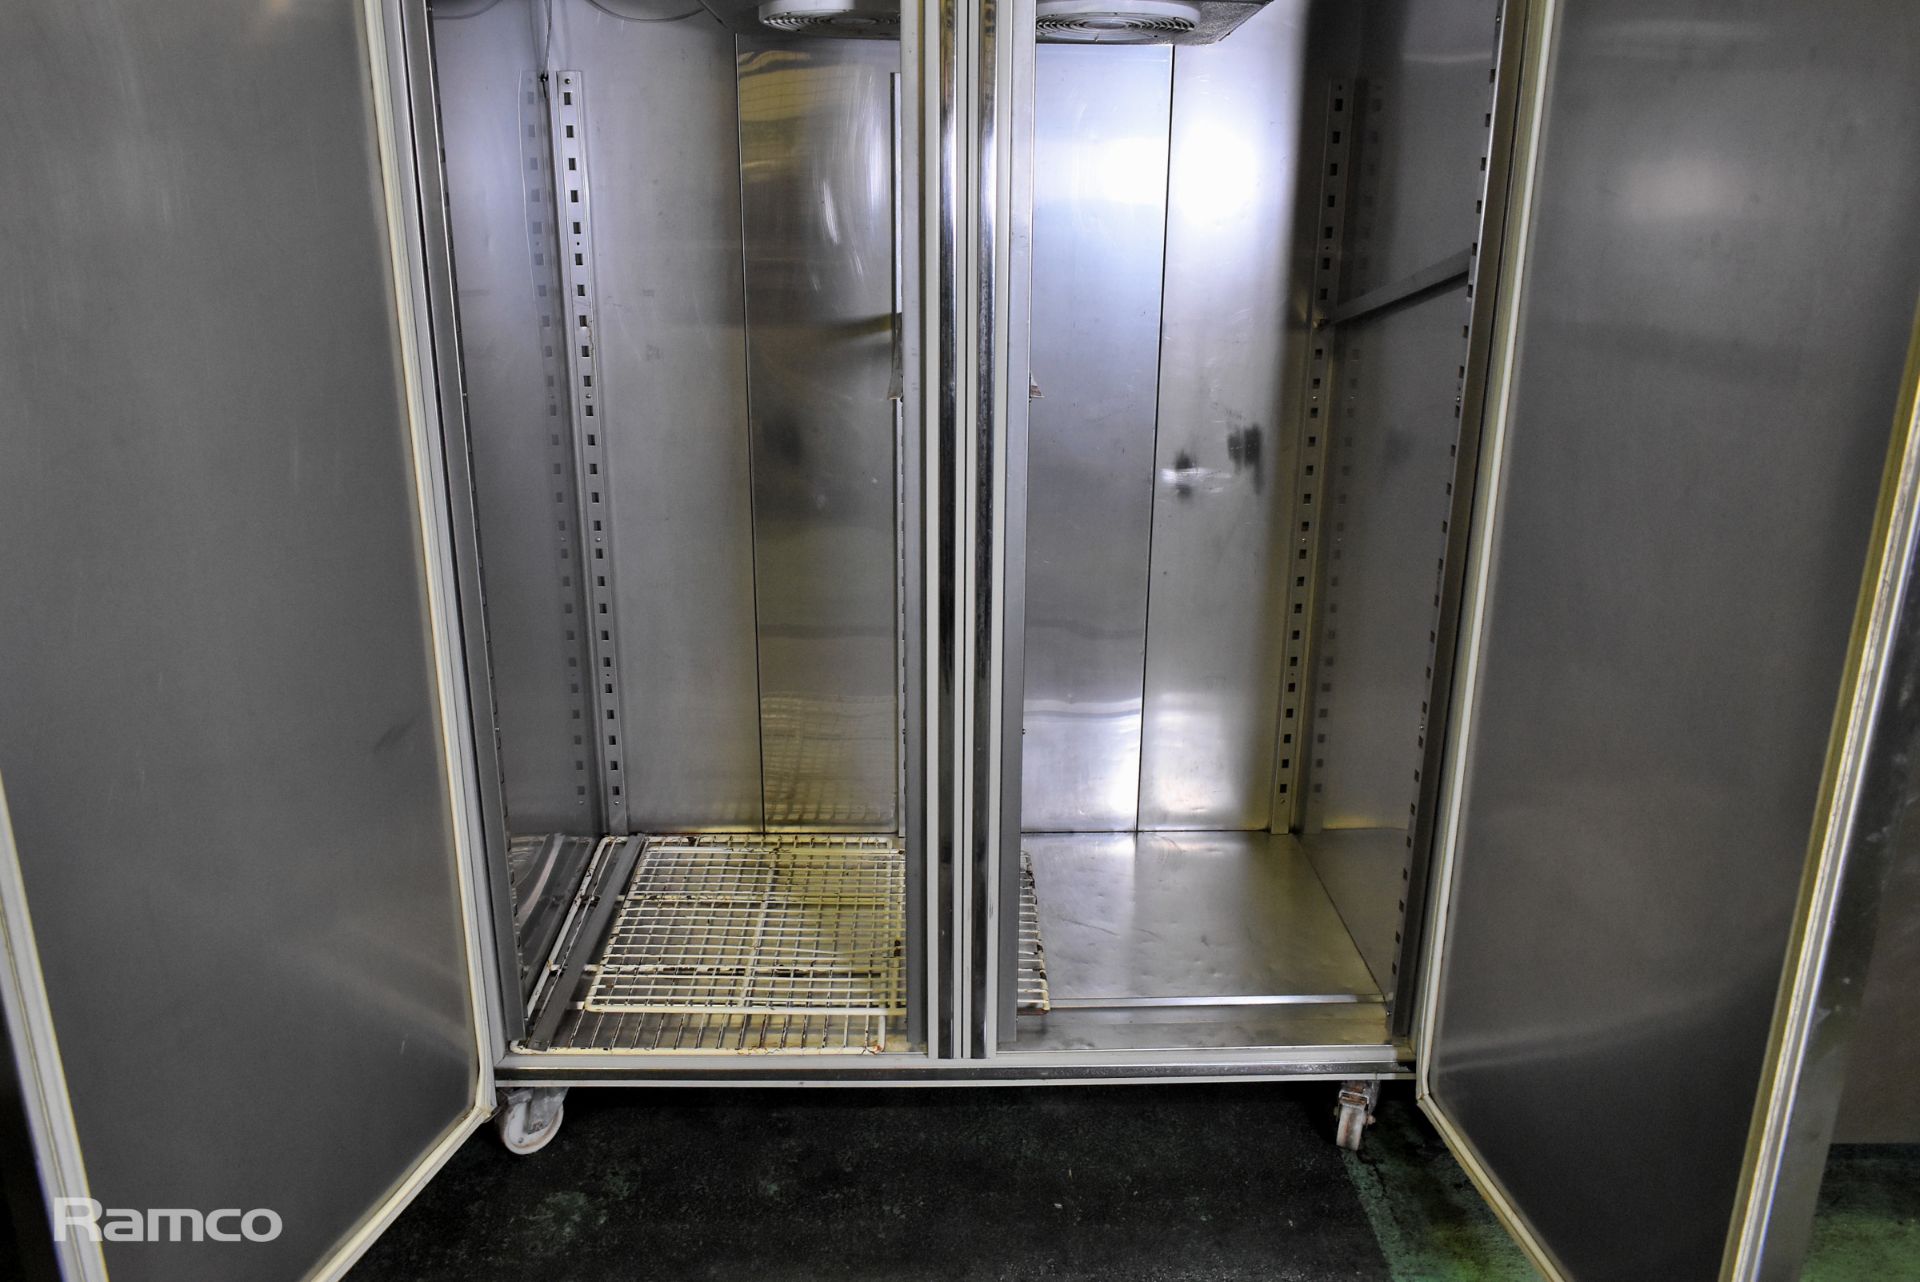 Blizzard stainless steel double door upright freezer - W 1400 x D 850 x H 2090mm - Image 2 of 8